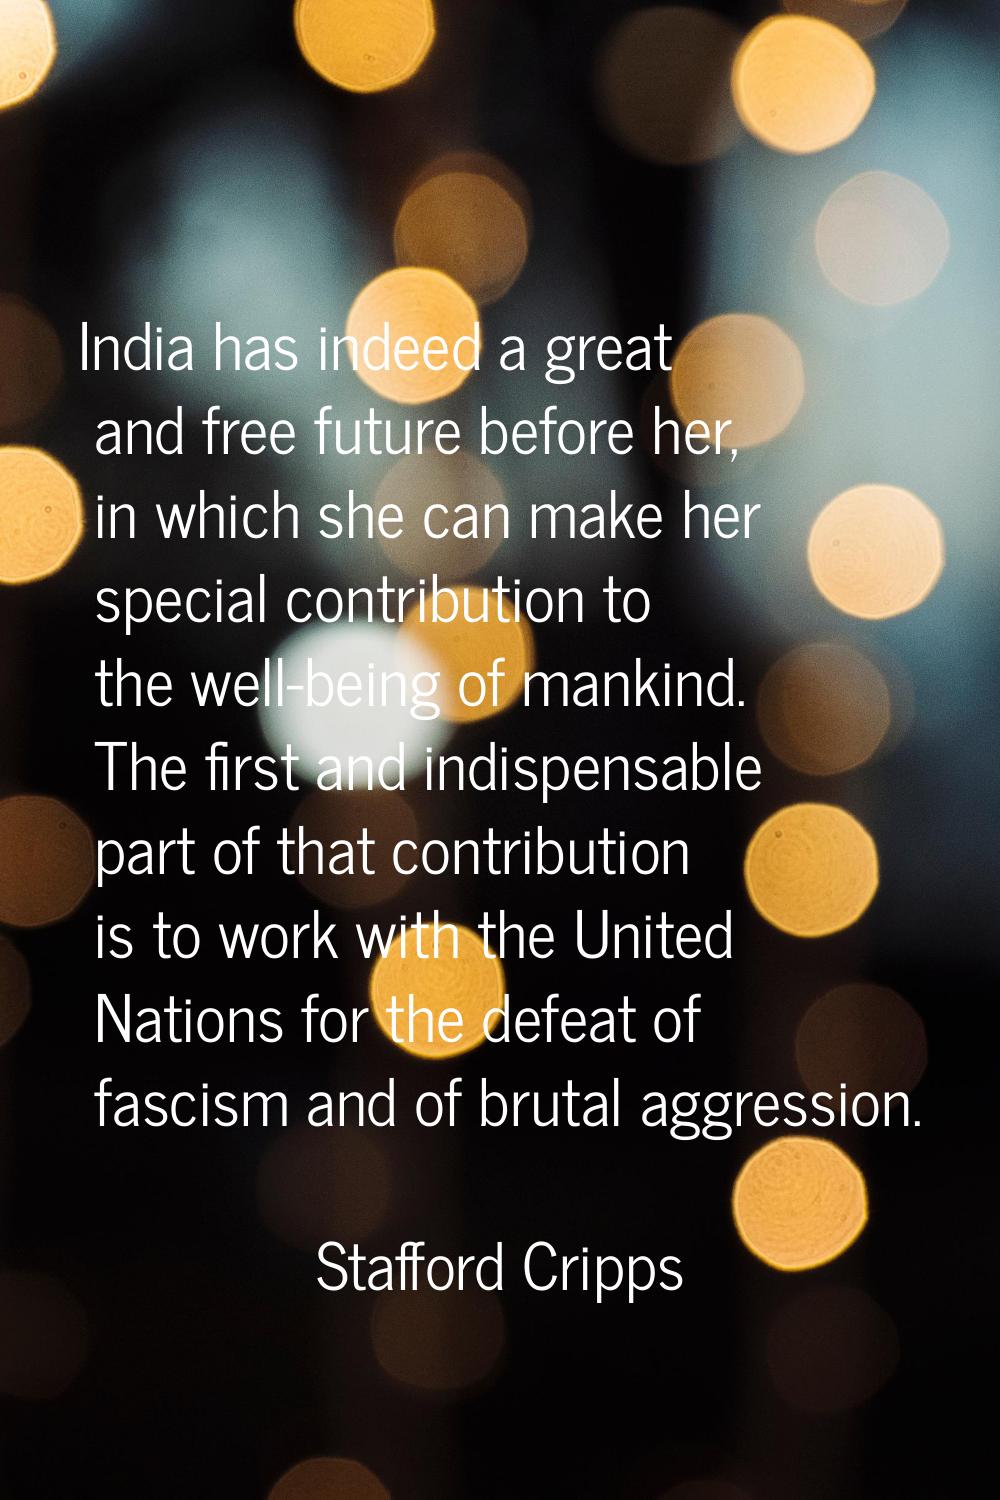 India has indeed a great and free future before her, in which she can make her special contribution